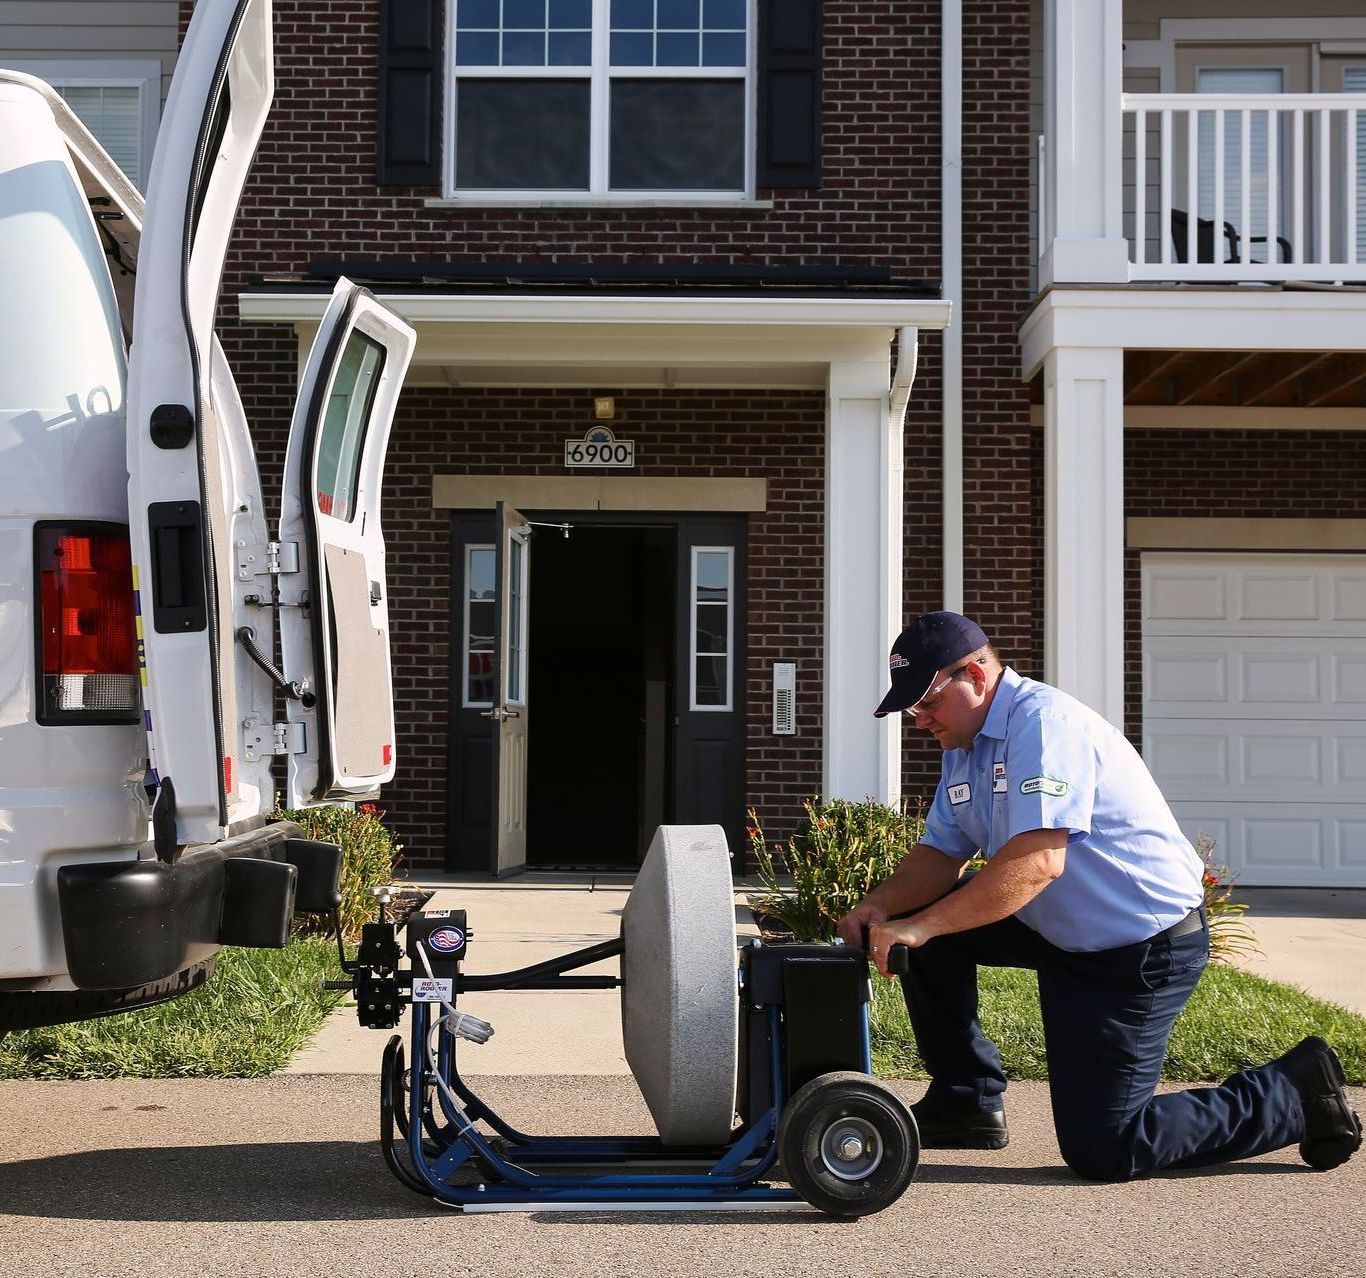 Plumber Van – Apple Valley, CA – Roto-Rooter Plumbers and Septic Service